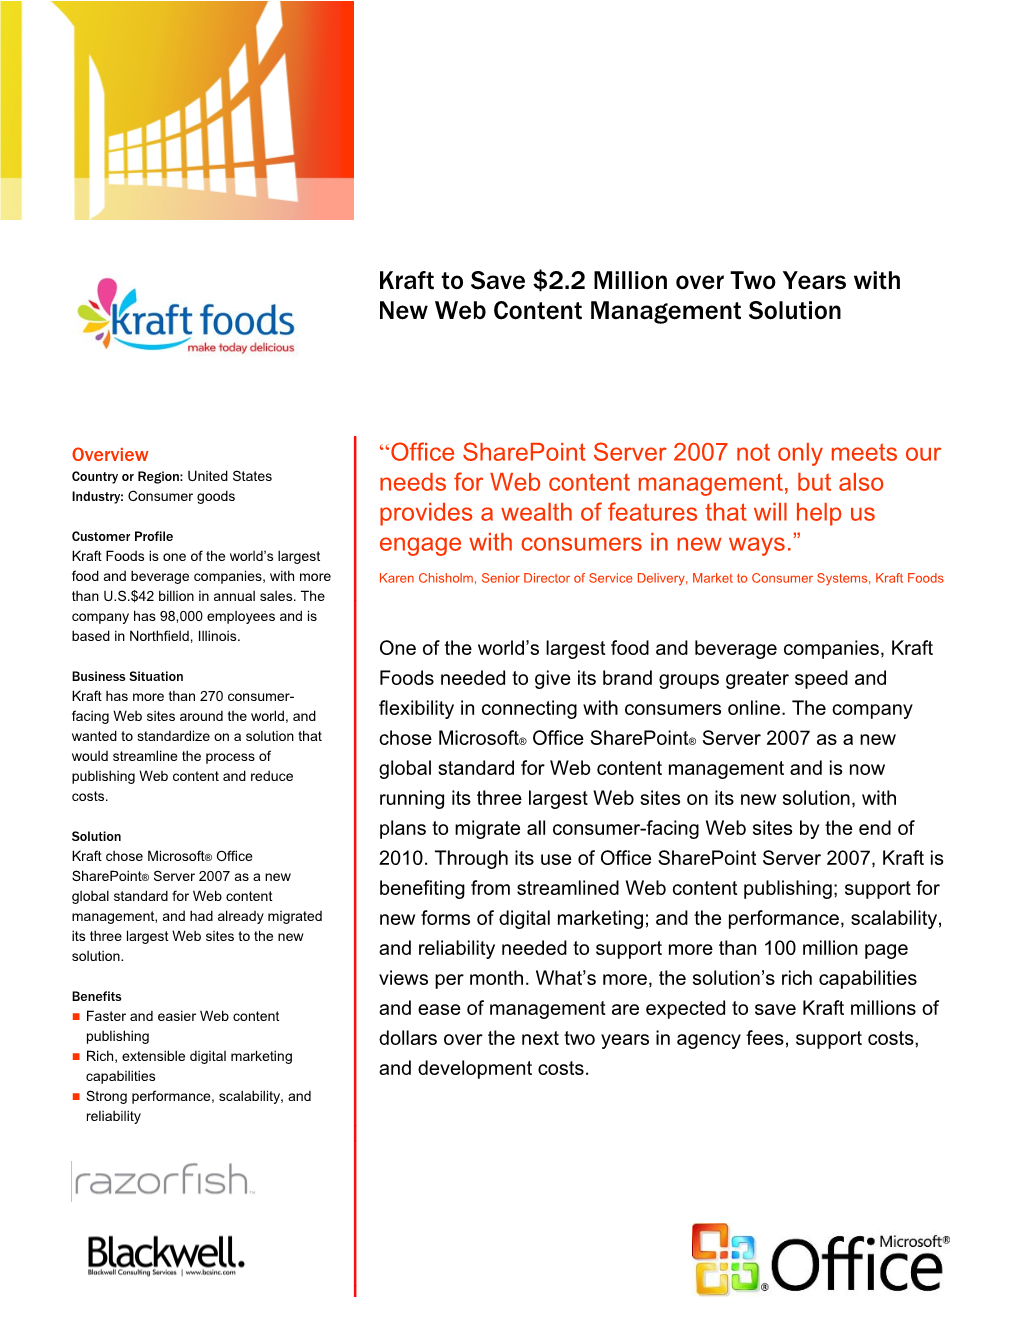 Kraft to Save $2.1 Million Over Two Years with New Web Content Management Solution